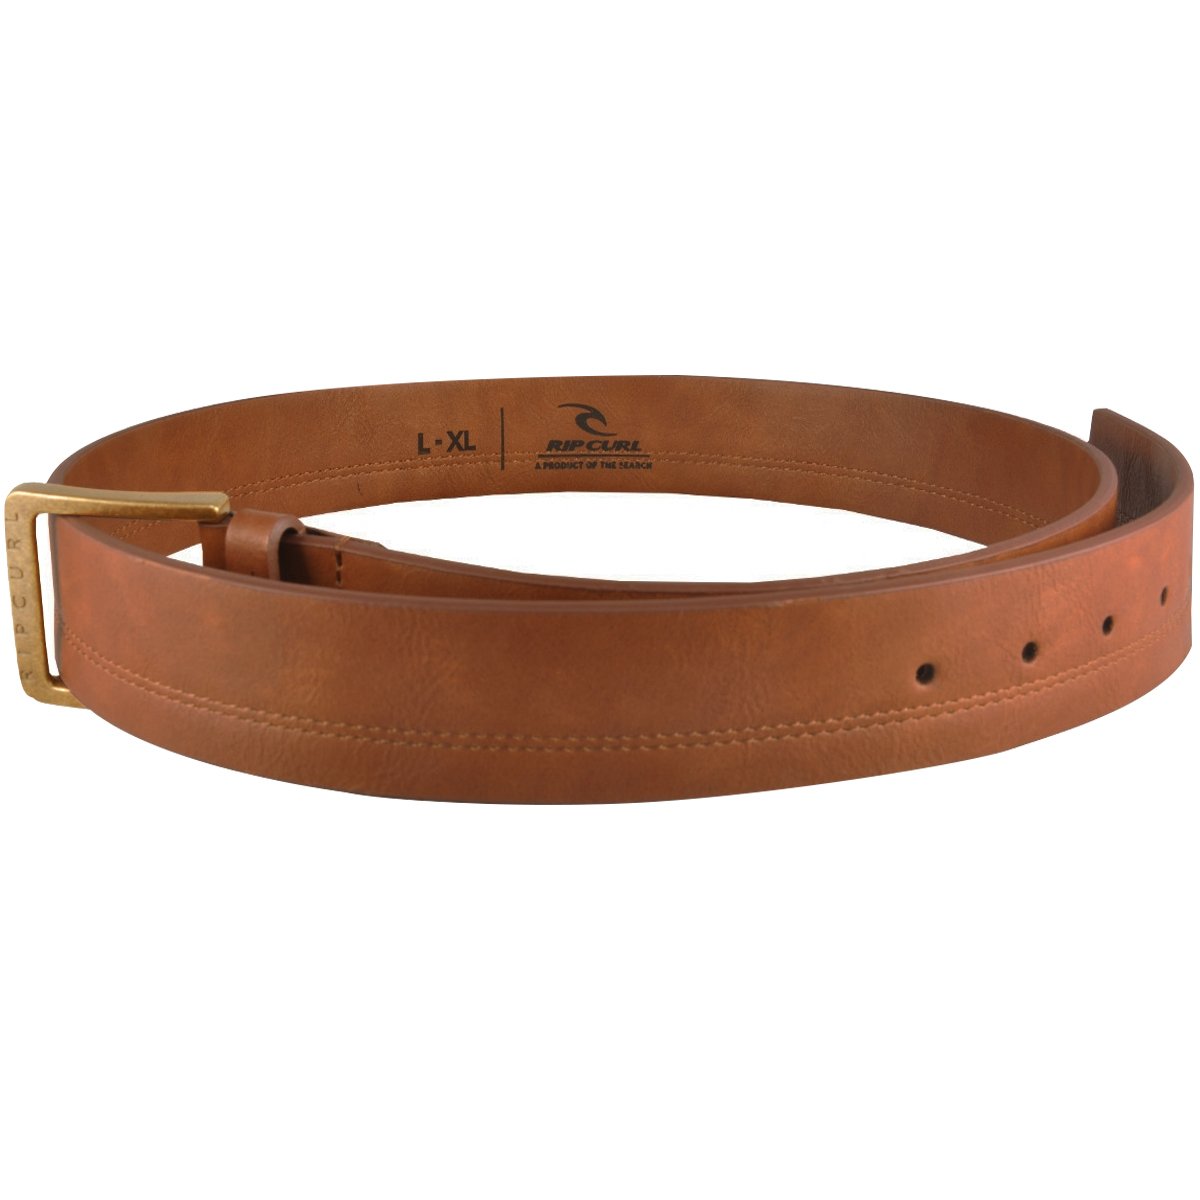 Cinto Rip Curl Double Stitch Brown Marrom 3